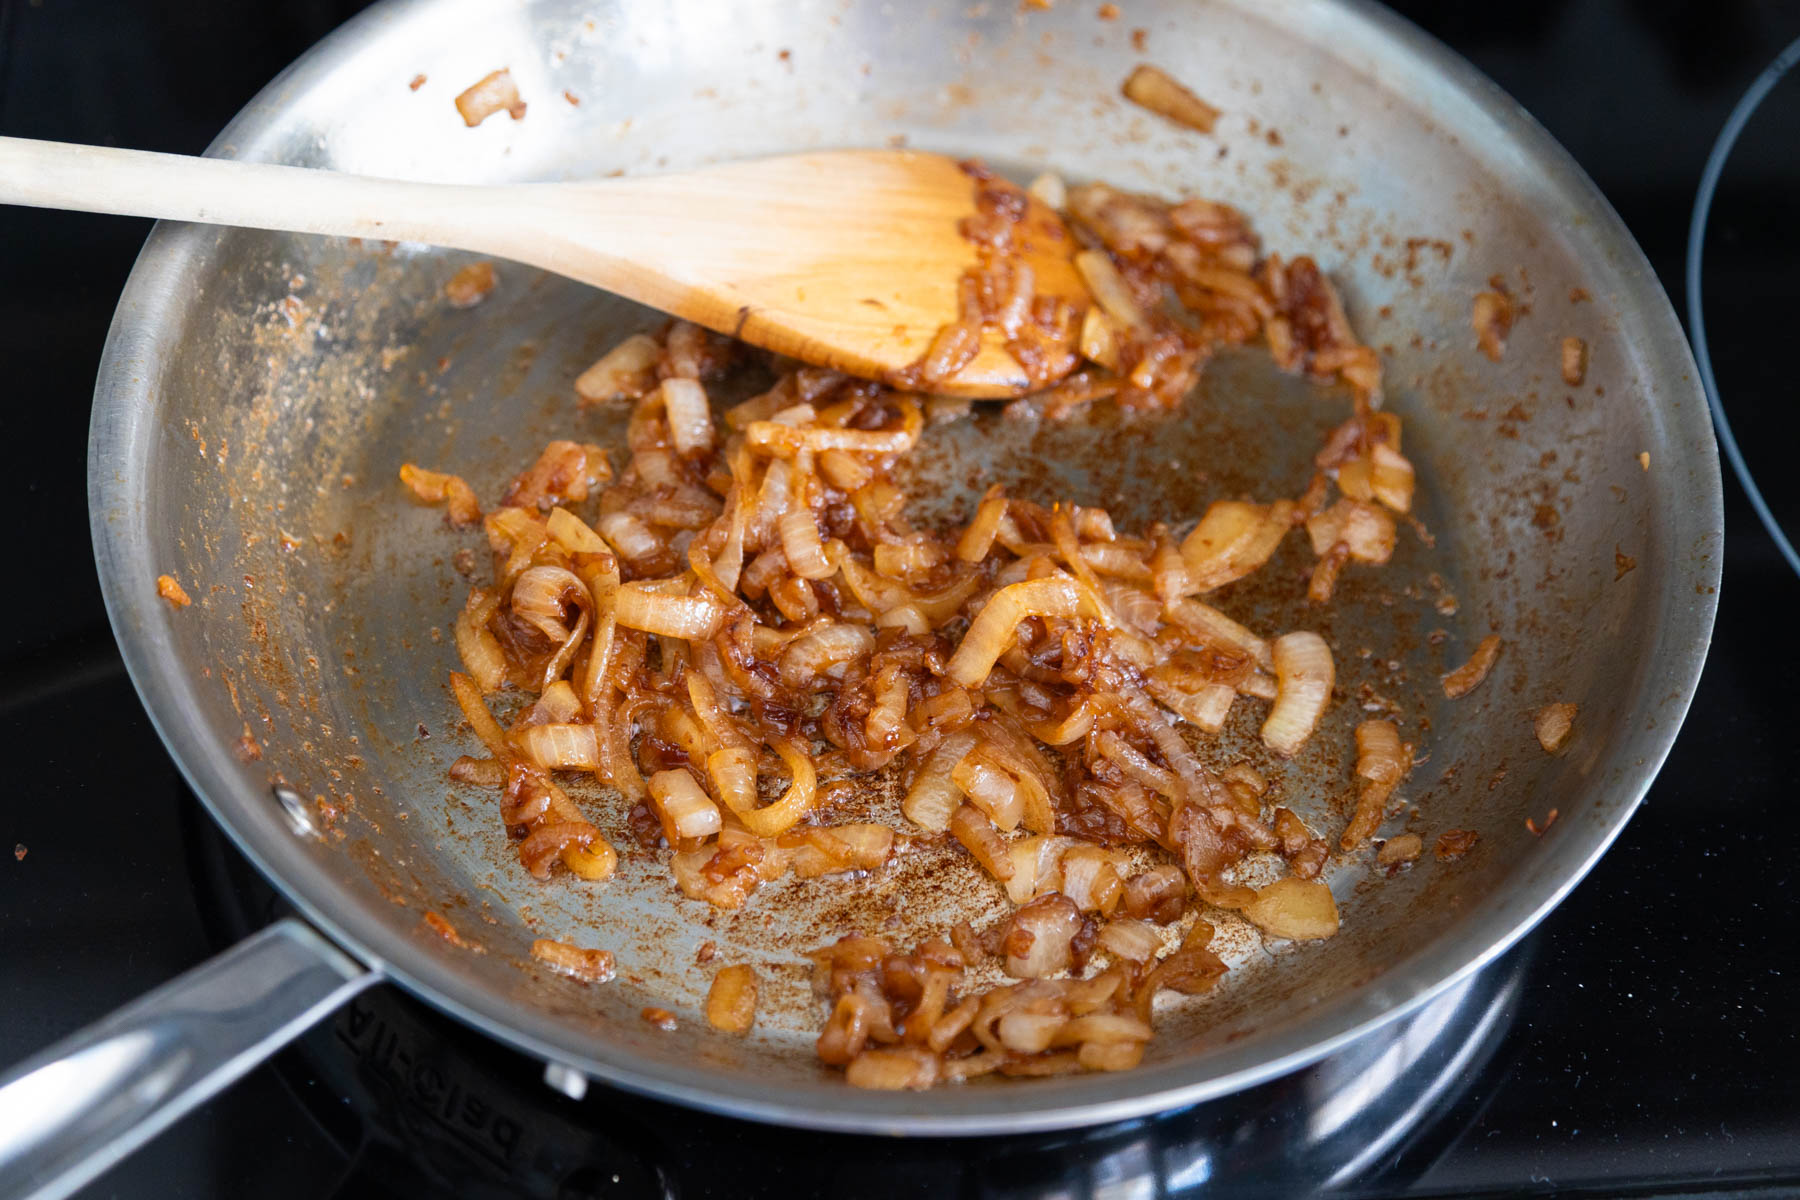 The caramelized onion are almost finished in the skillet, they are a deep golden color.